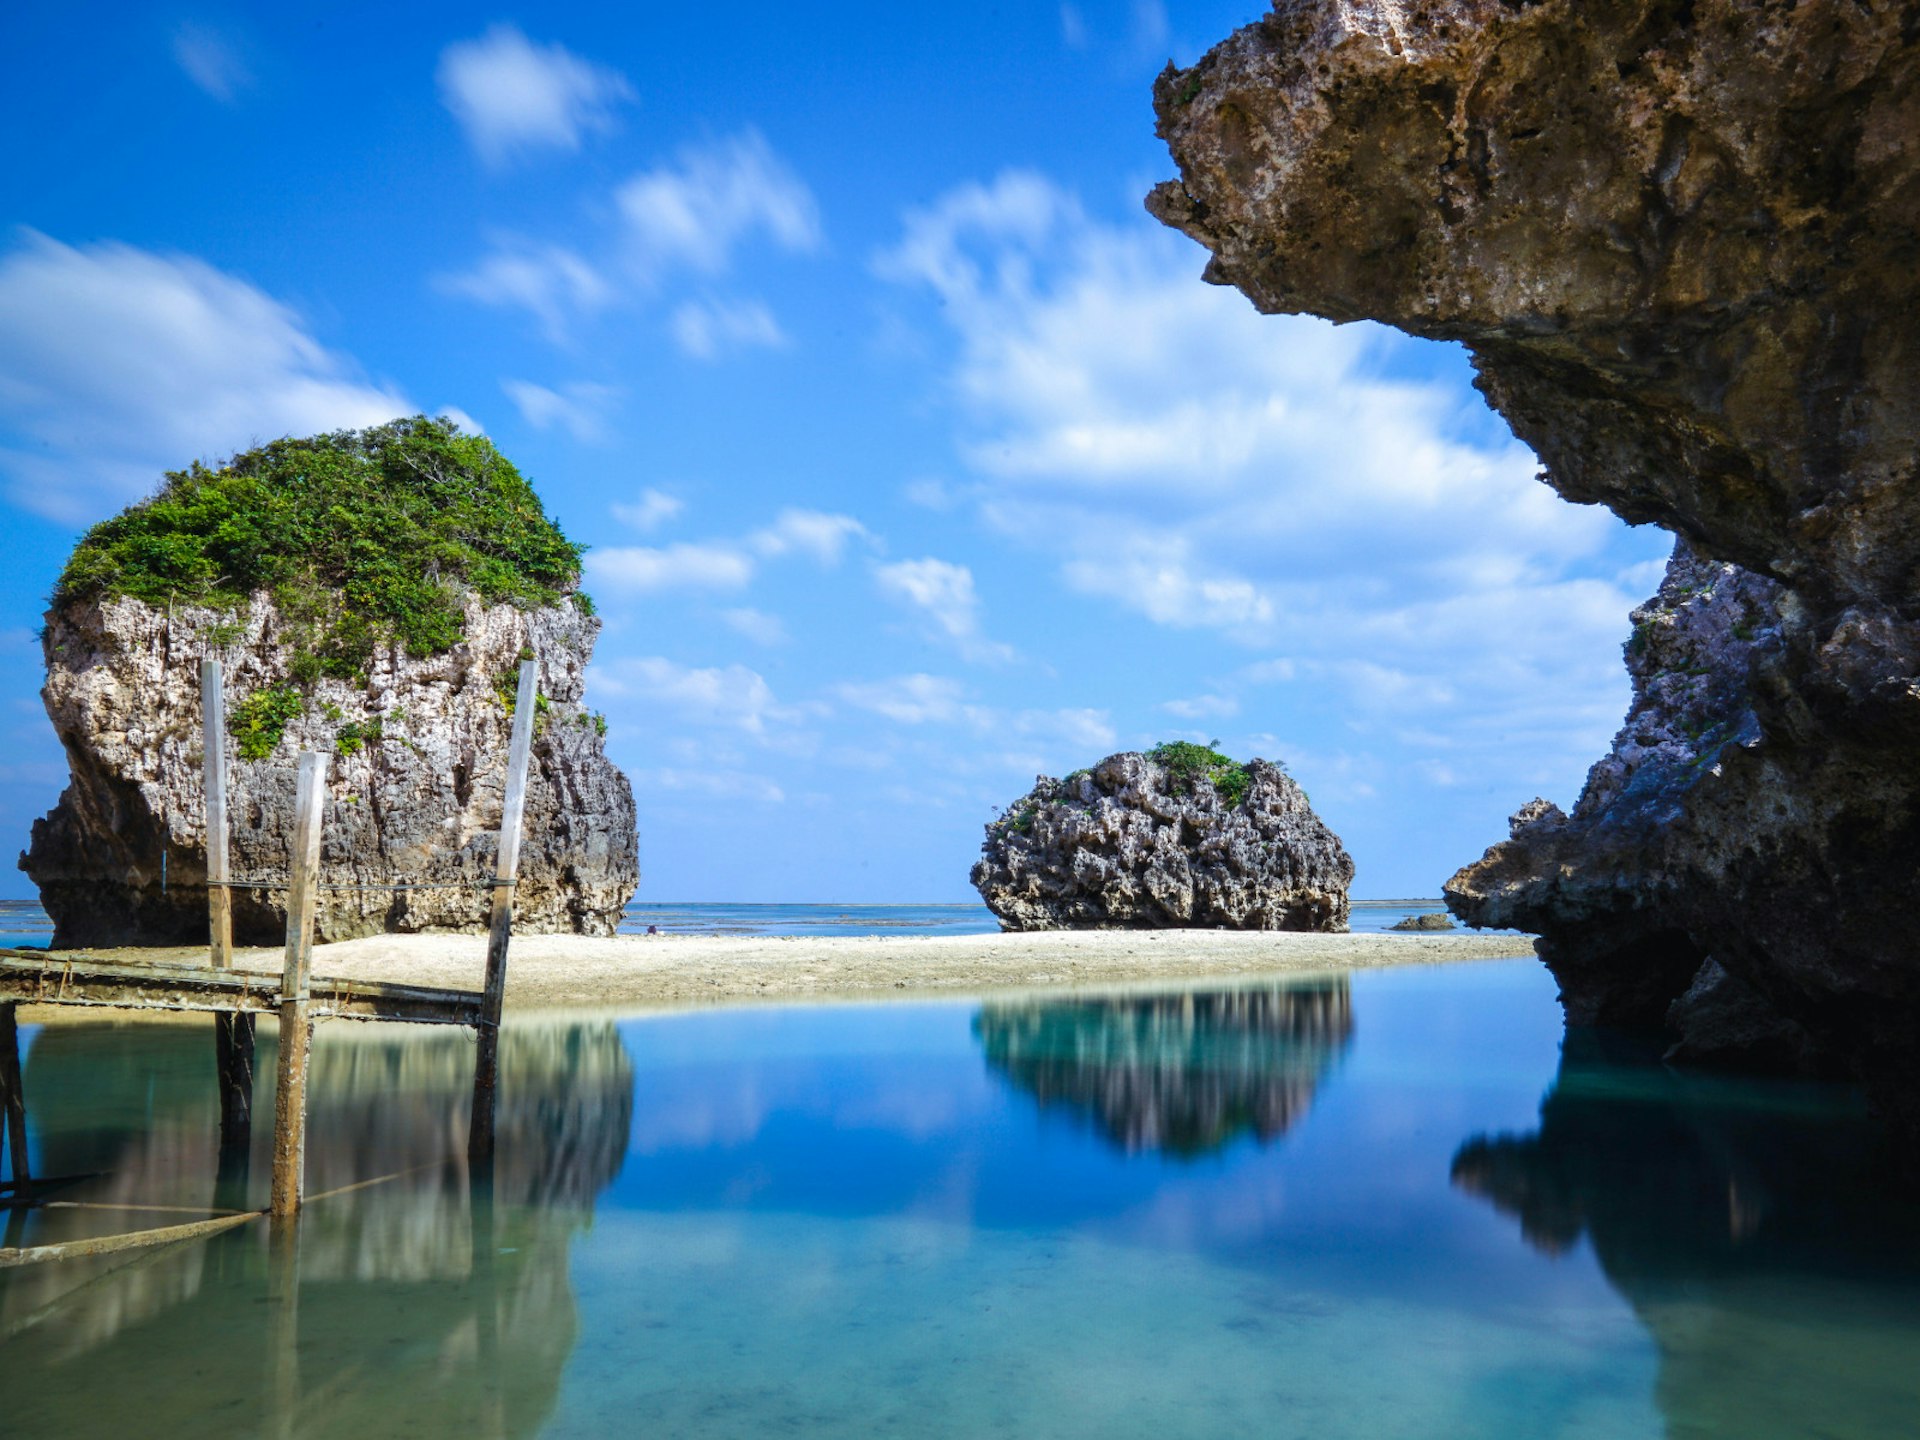 A long exposure shot taken with a tripod and neutral density filter at Mibaru Beach, Okinawa